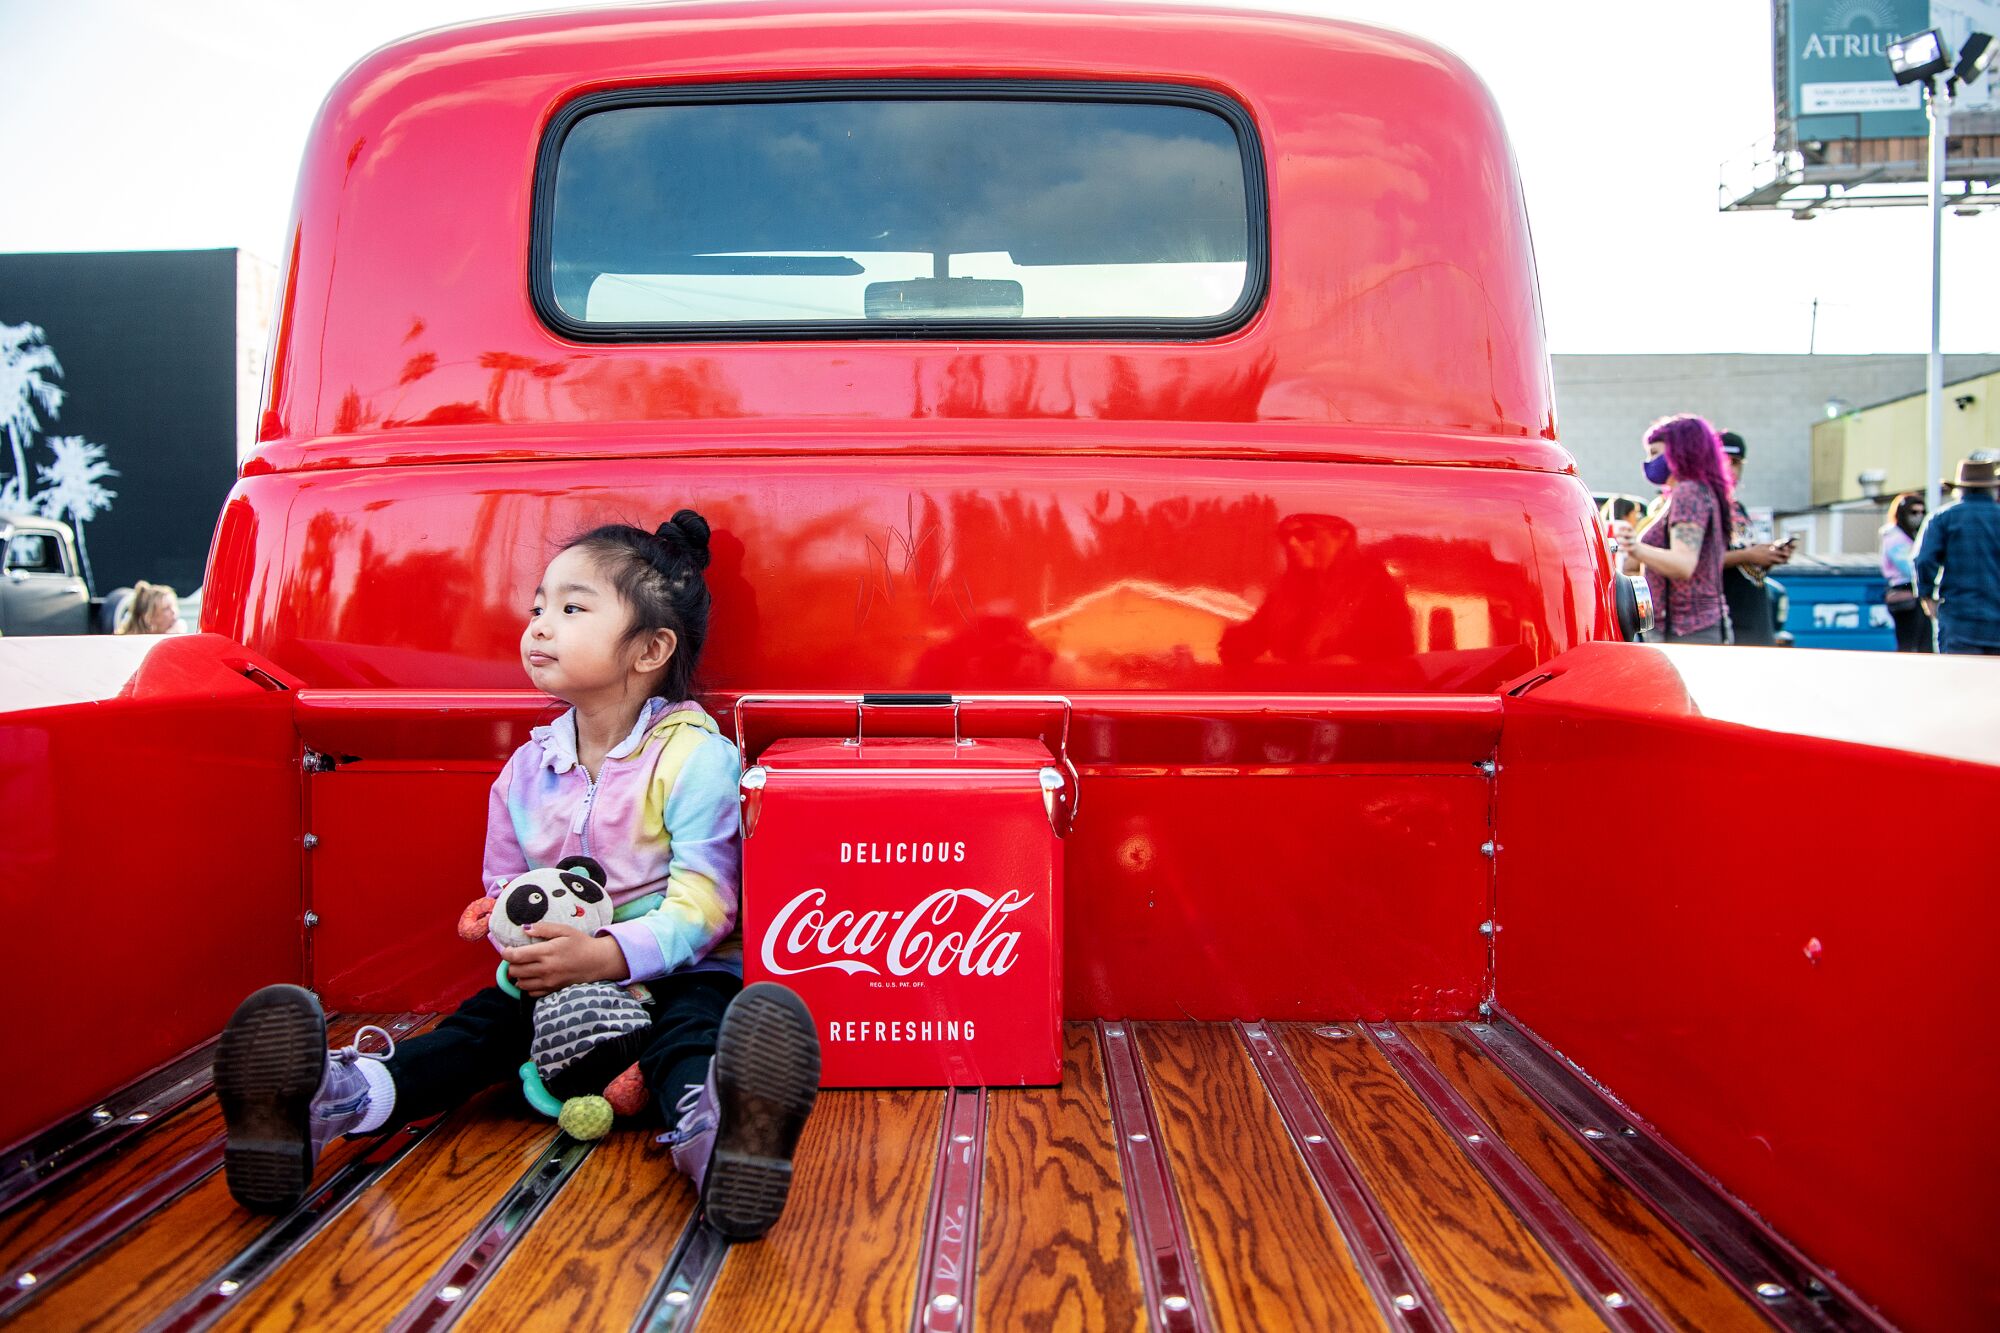 Samantha Mary De la Cruz sits in the back of a parked truck